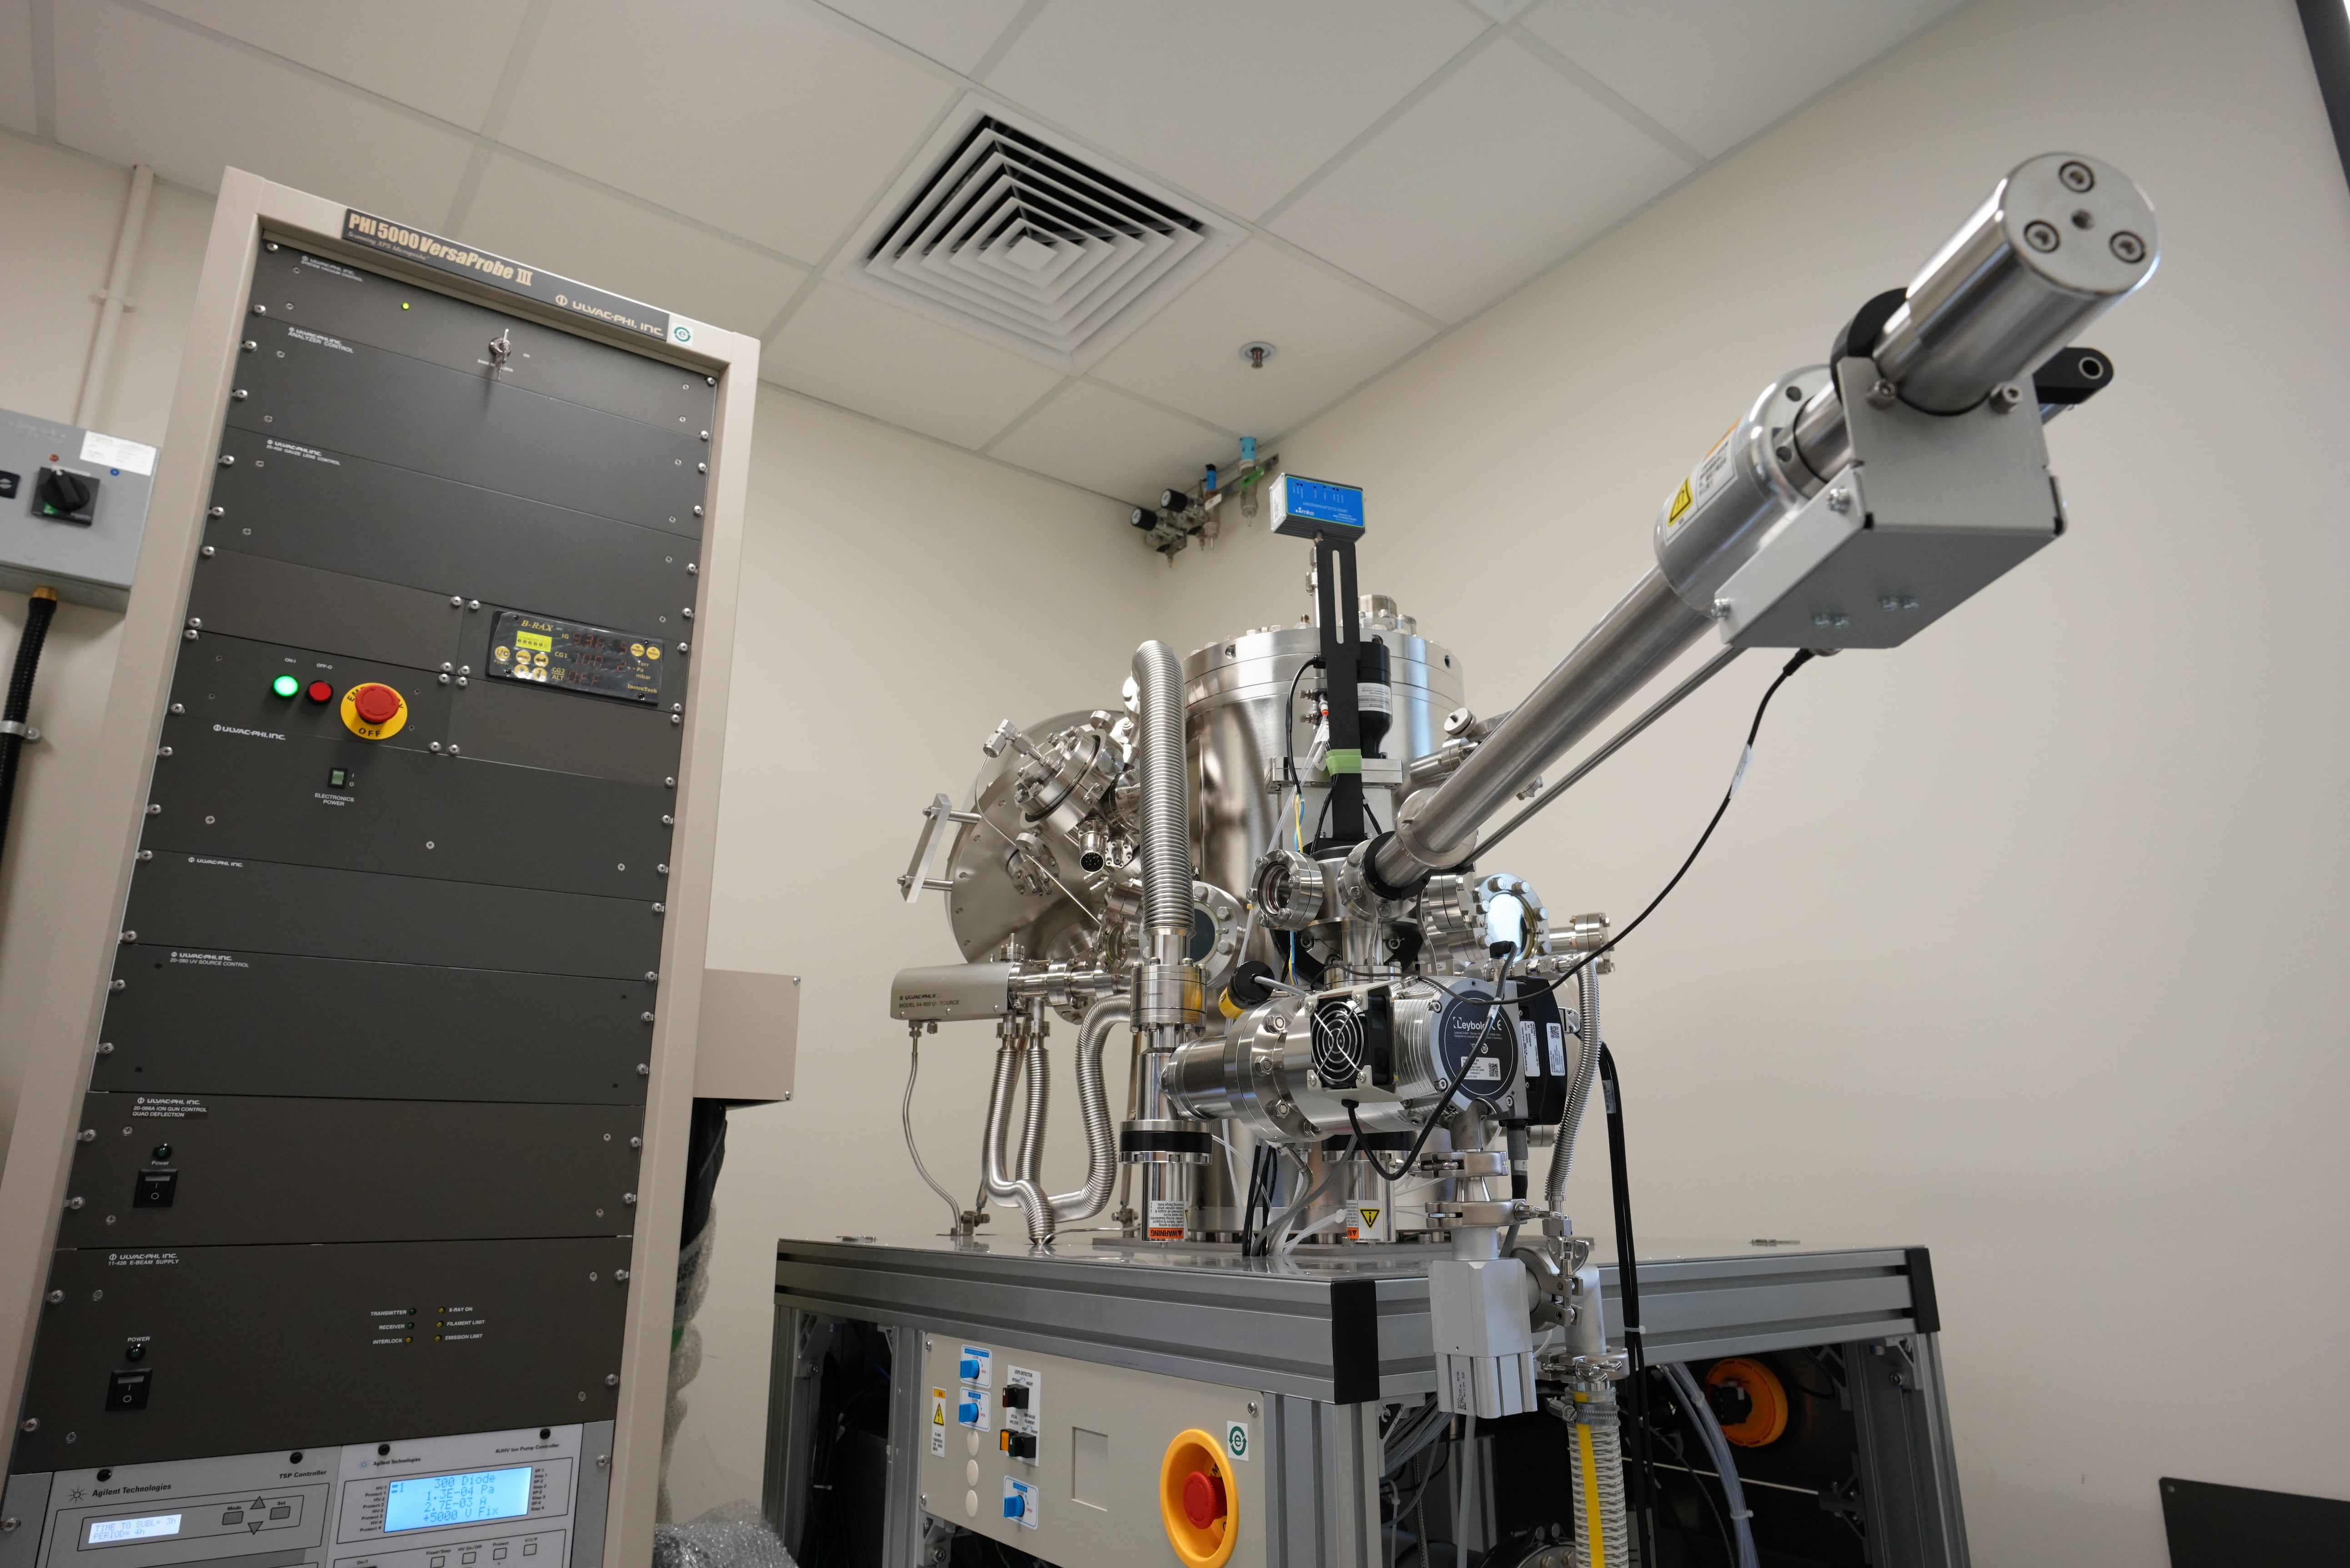 X-ray Photoelectron Spectrometer for analyzing elemental composition and chemical environment of electronic materials.